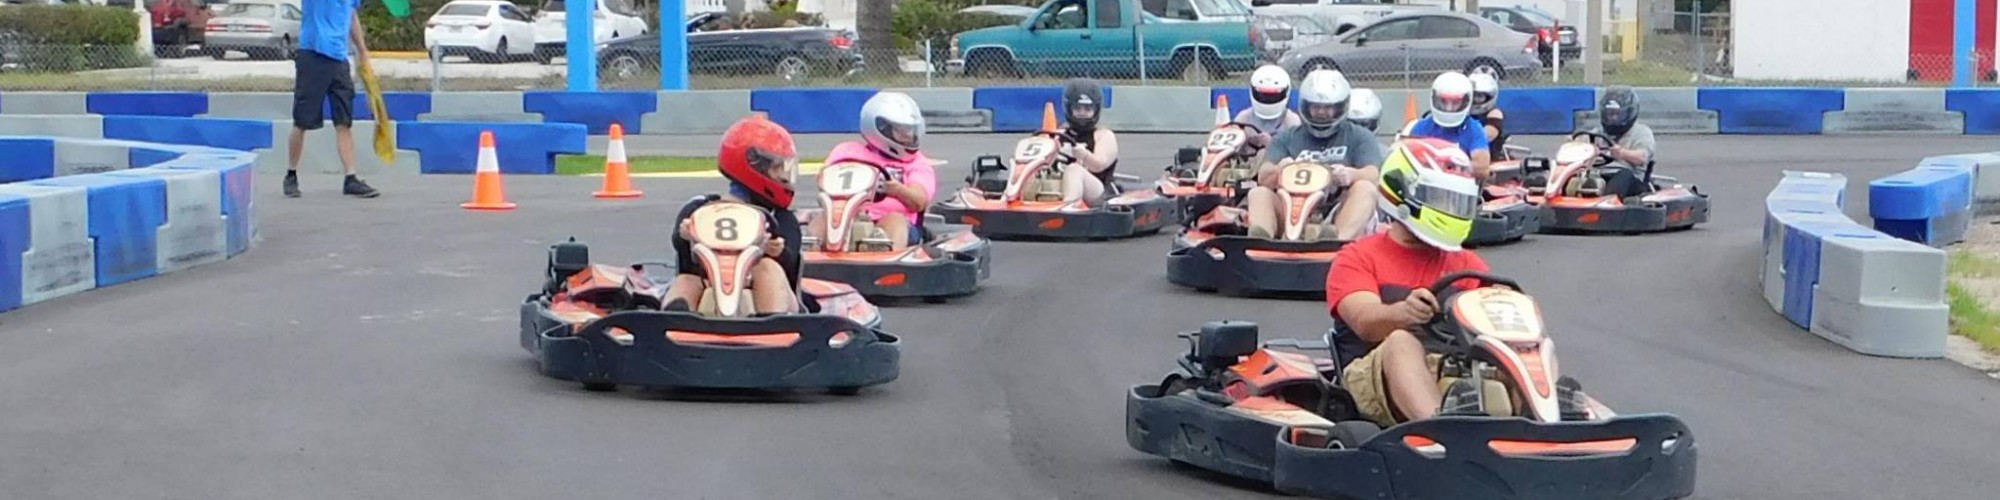 Pro Karting Experience